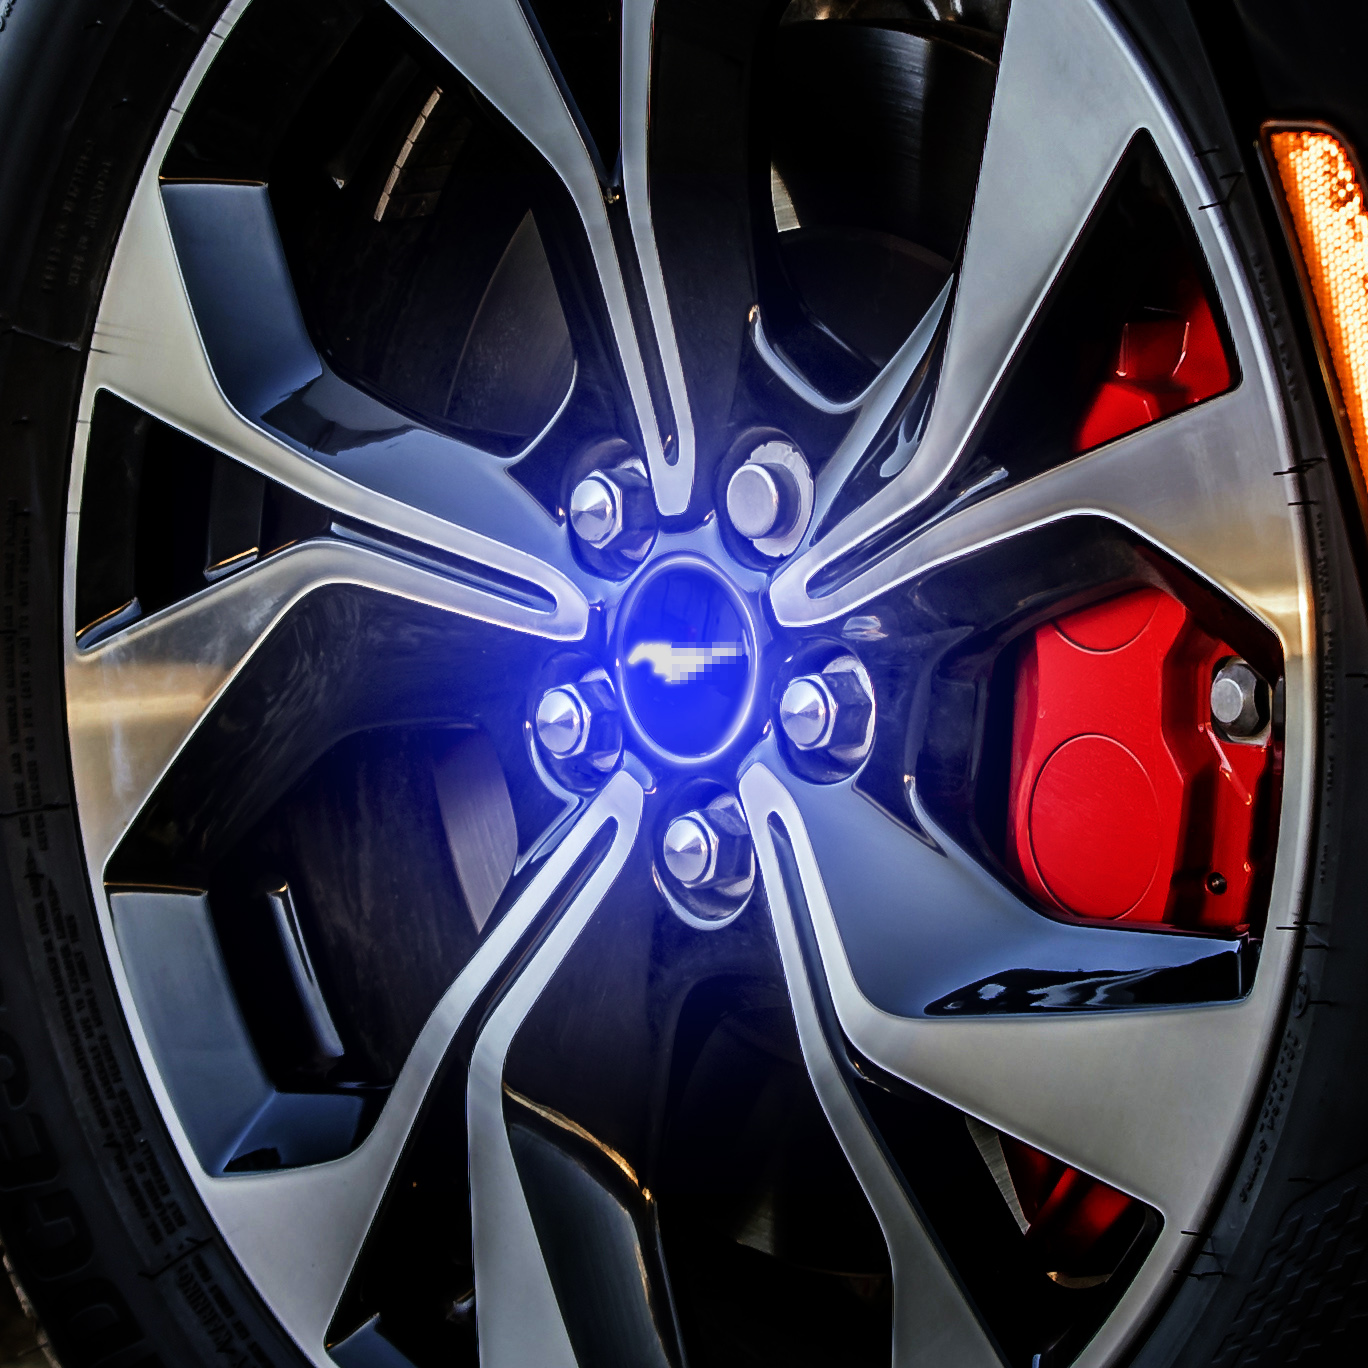 MME Led Wheel Caps - Set of four from BestEvMod